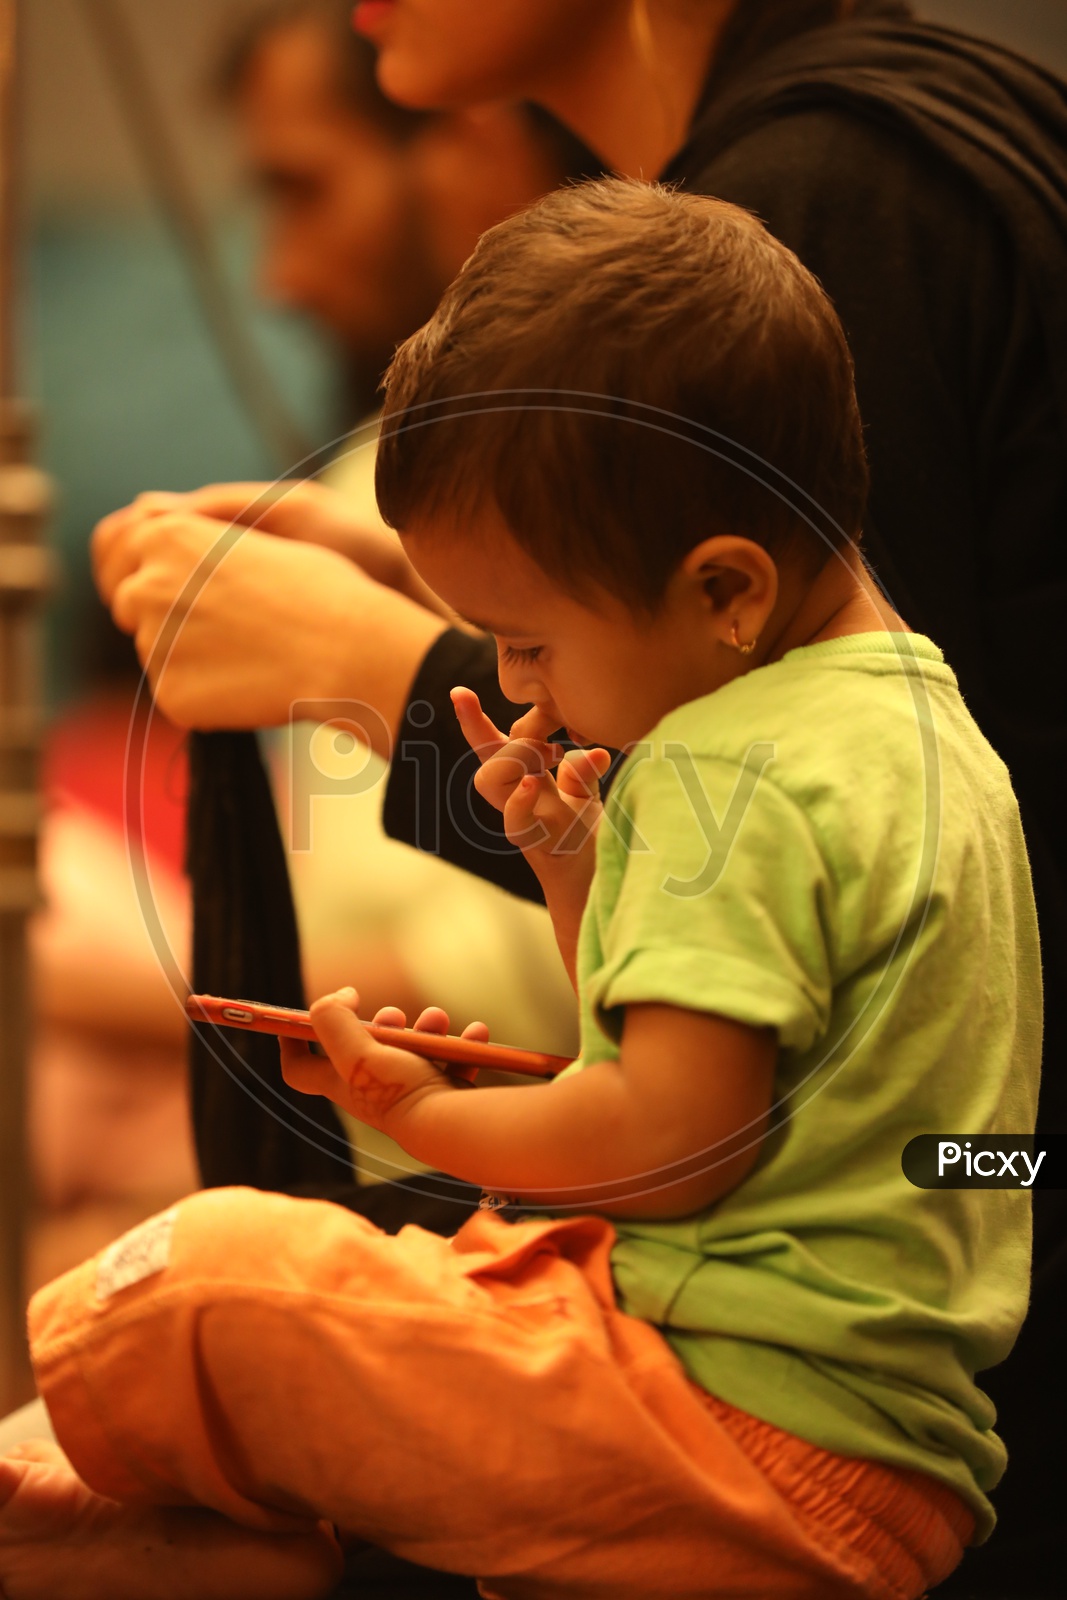 Indian Kid using Smartphone or Mobile